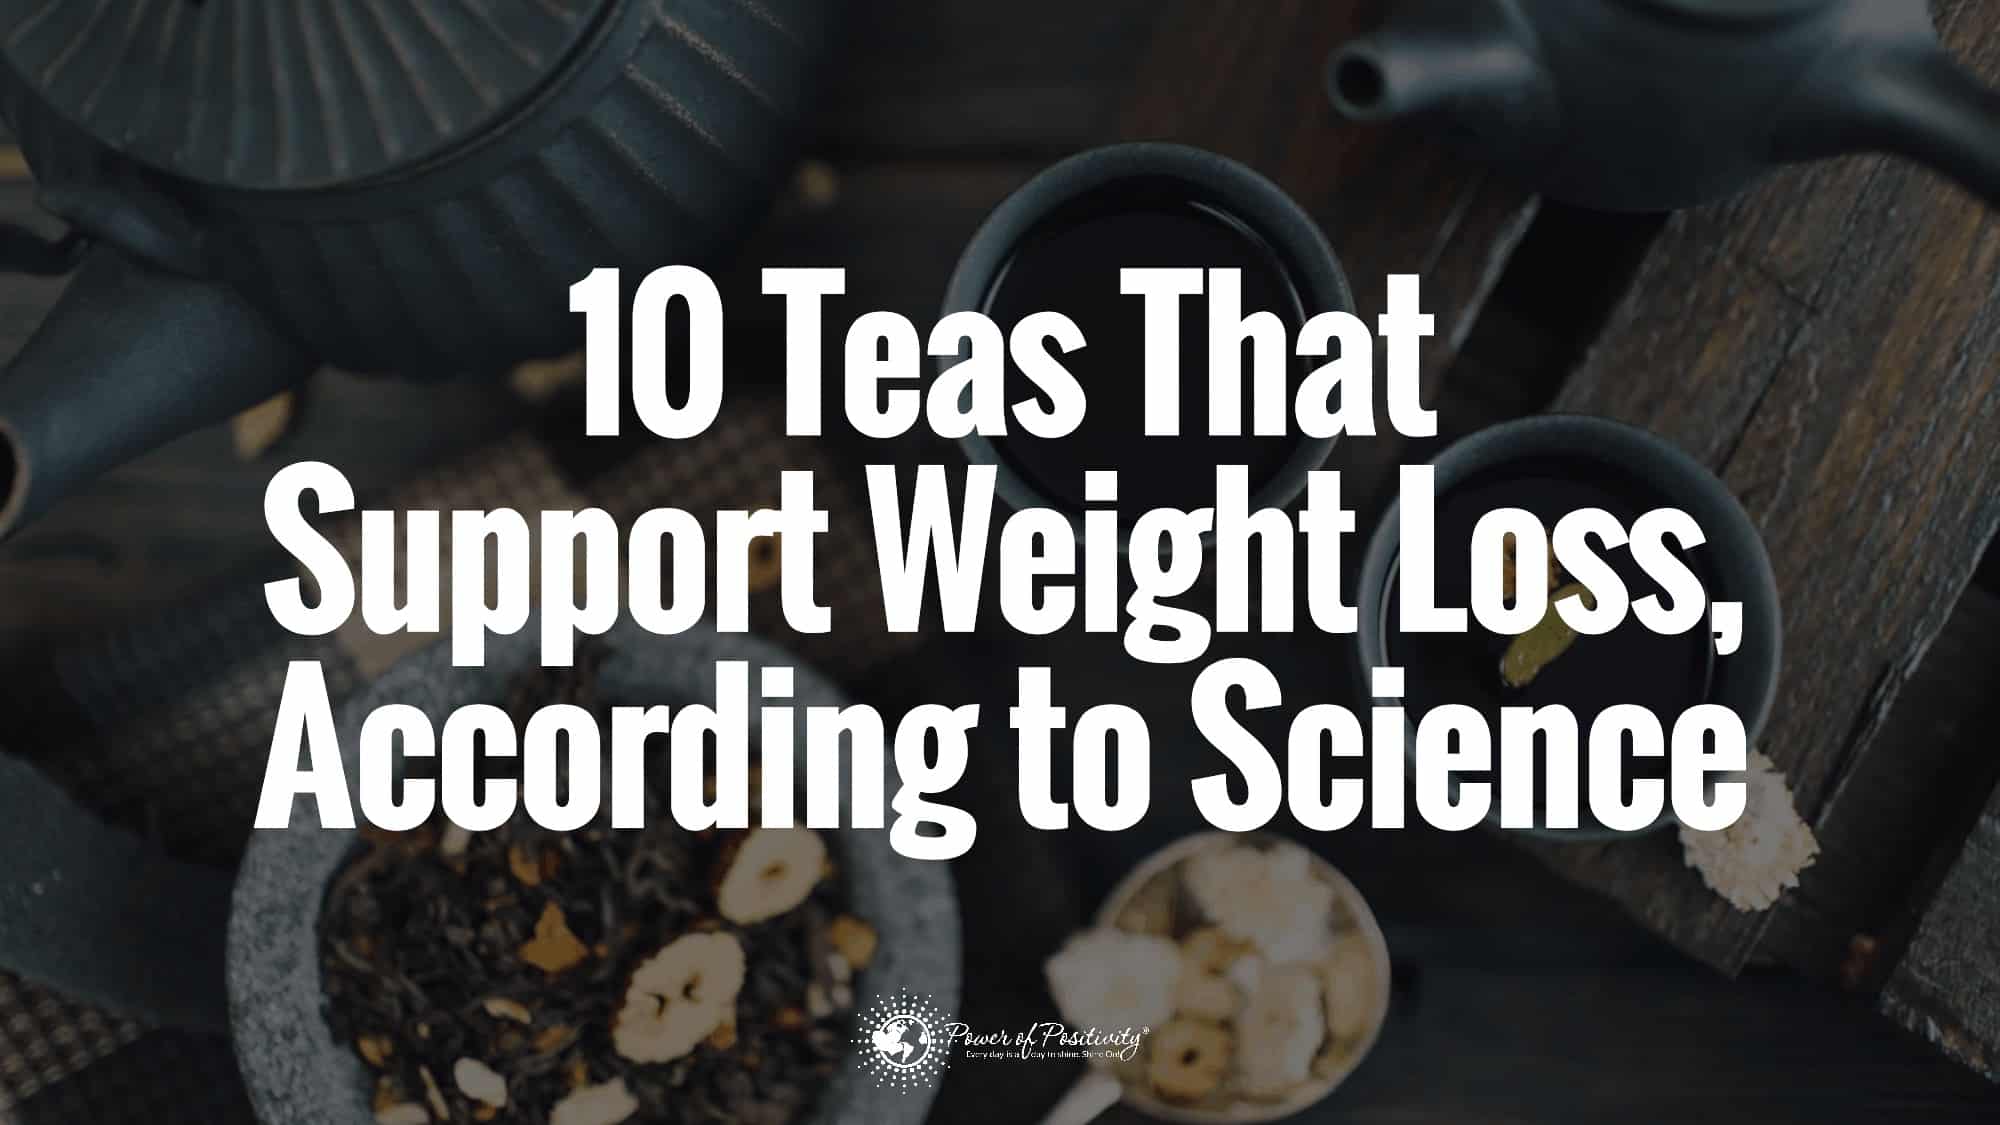 10 Teas That Support Weight Loss, According to Science